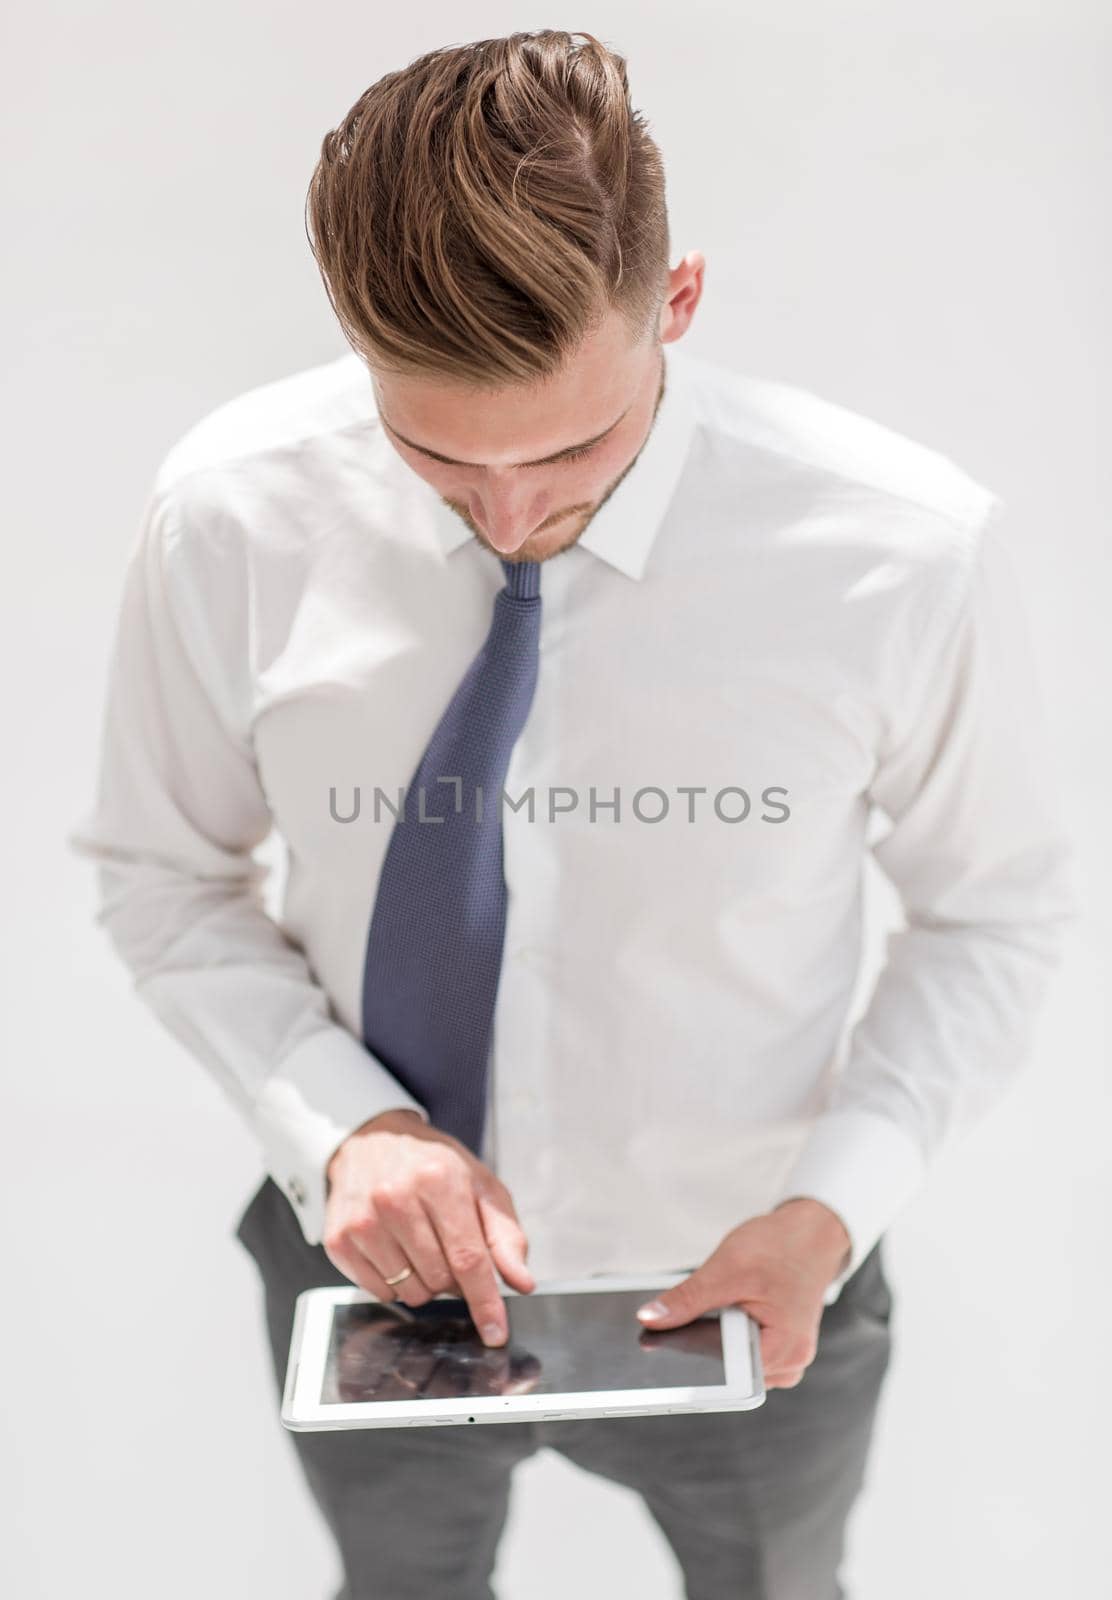 Examining new gadget. A confident man in a shirt and tie works on a digital tablet